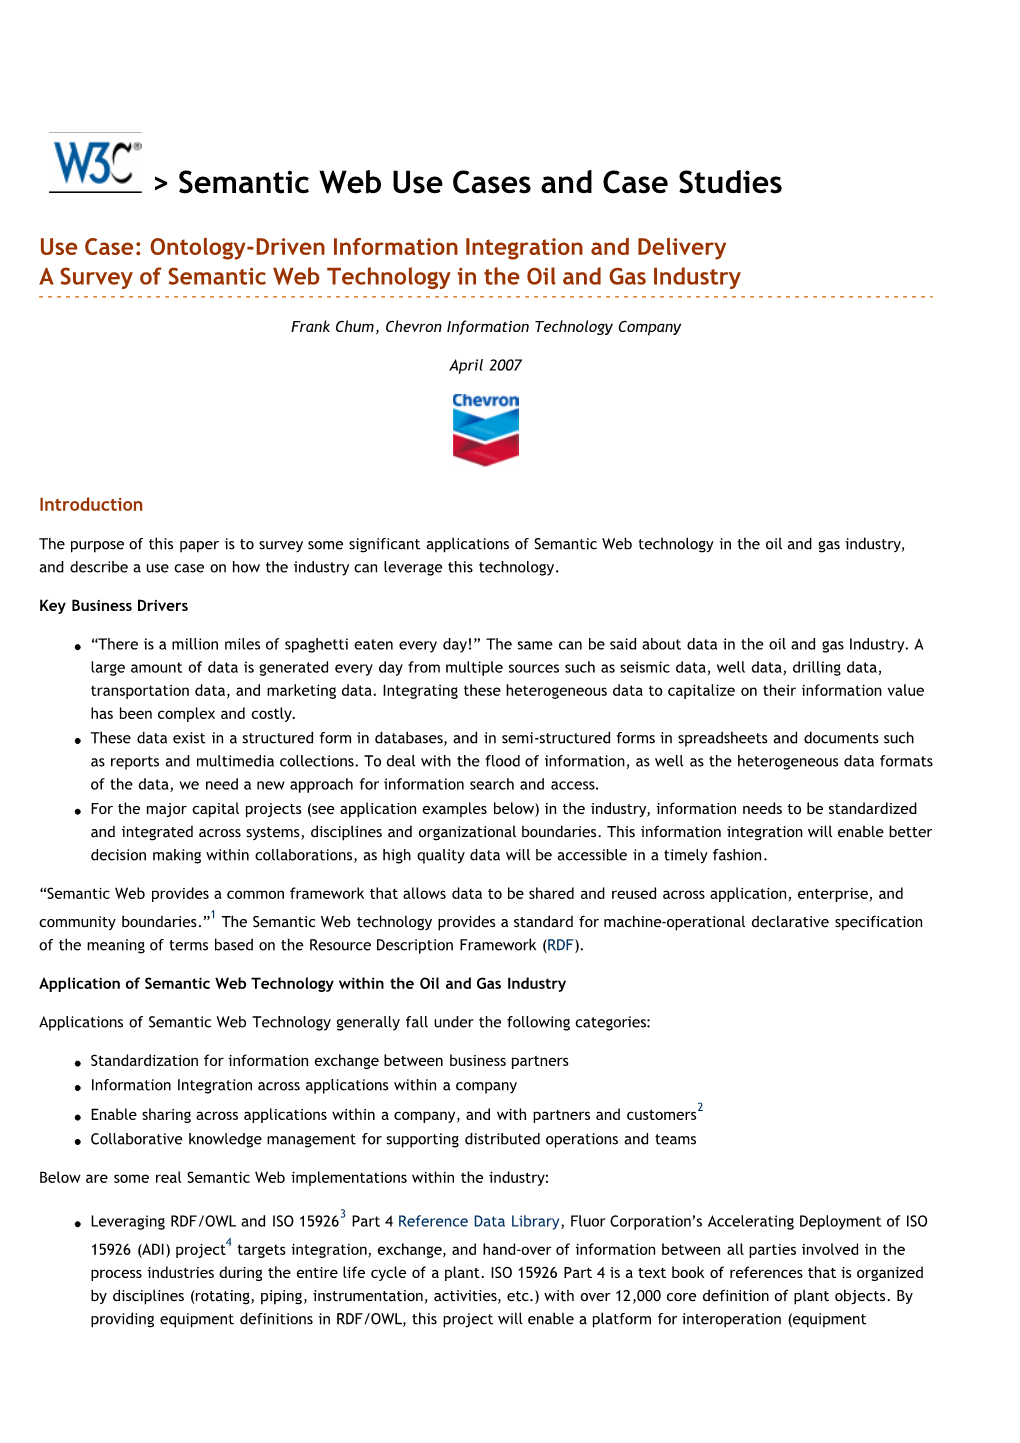 Use Case: Ontology-Driven Information Integration and Delivery a Survey of Semantic Web Technology in the Oil and Gas Industry